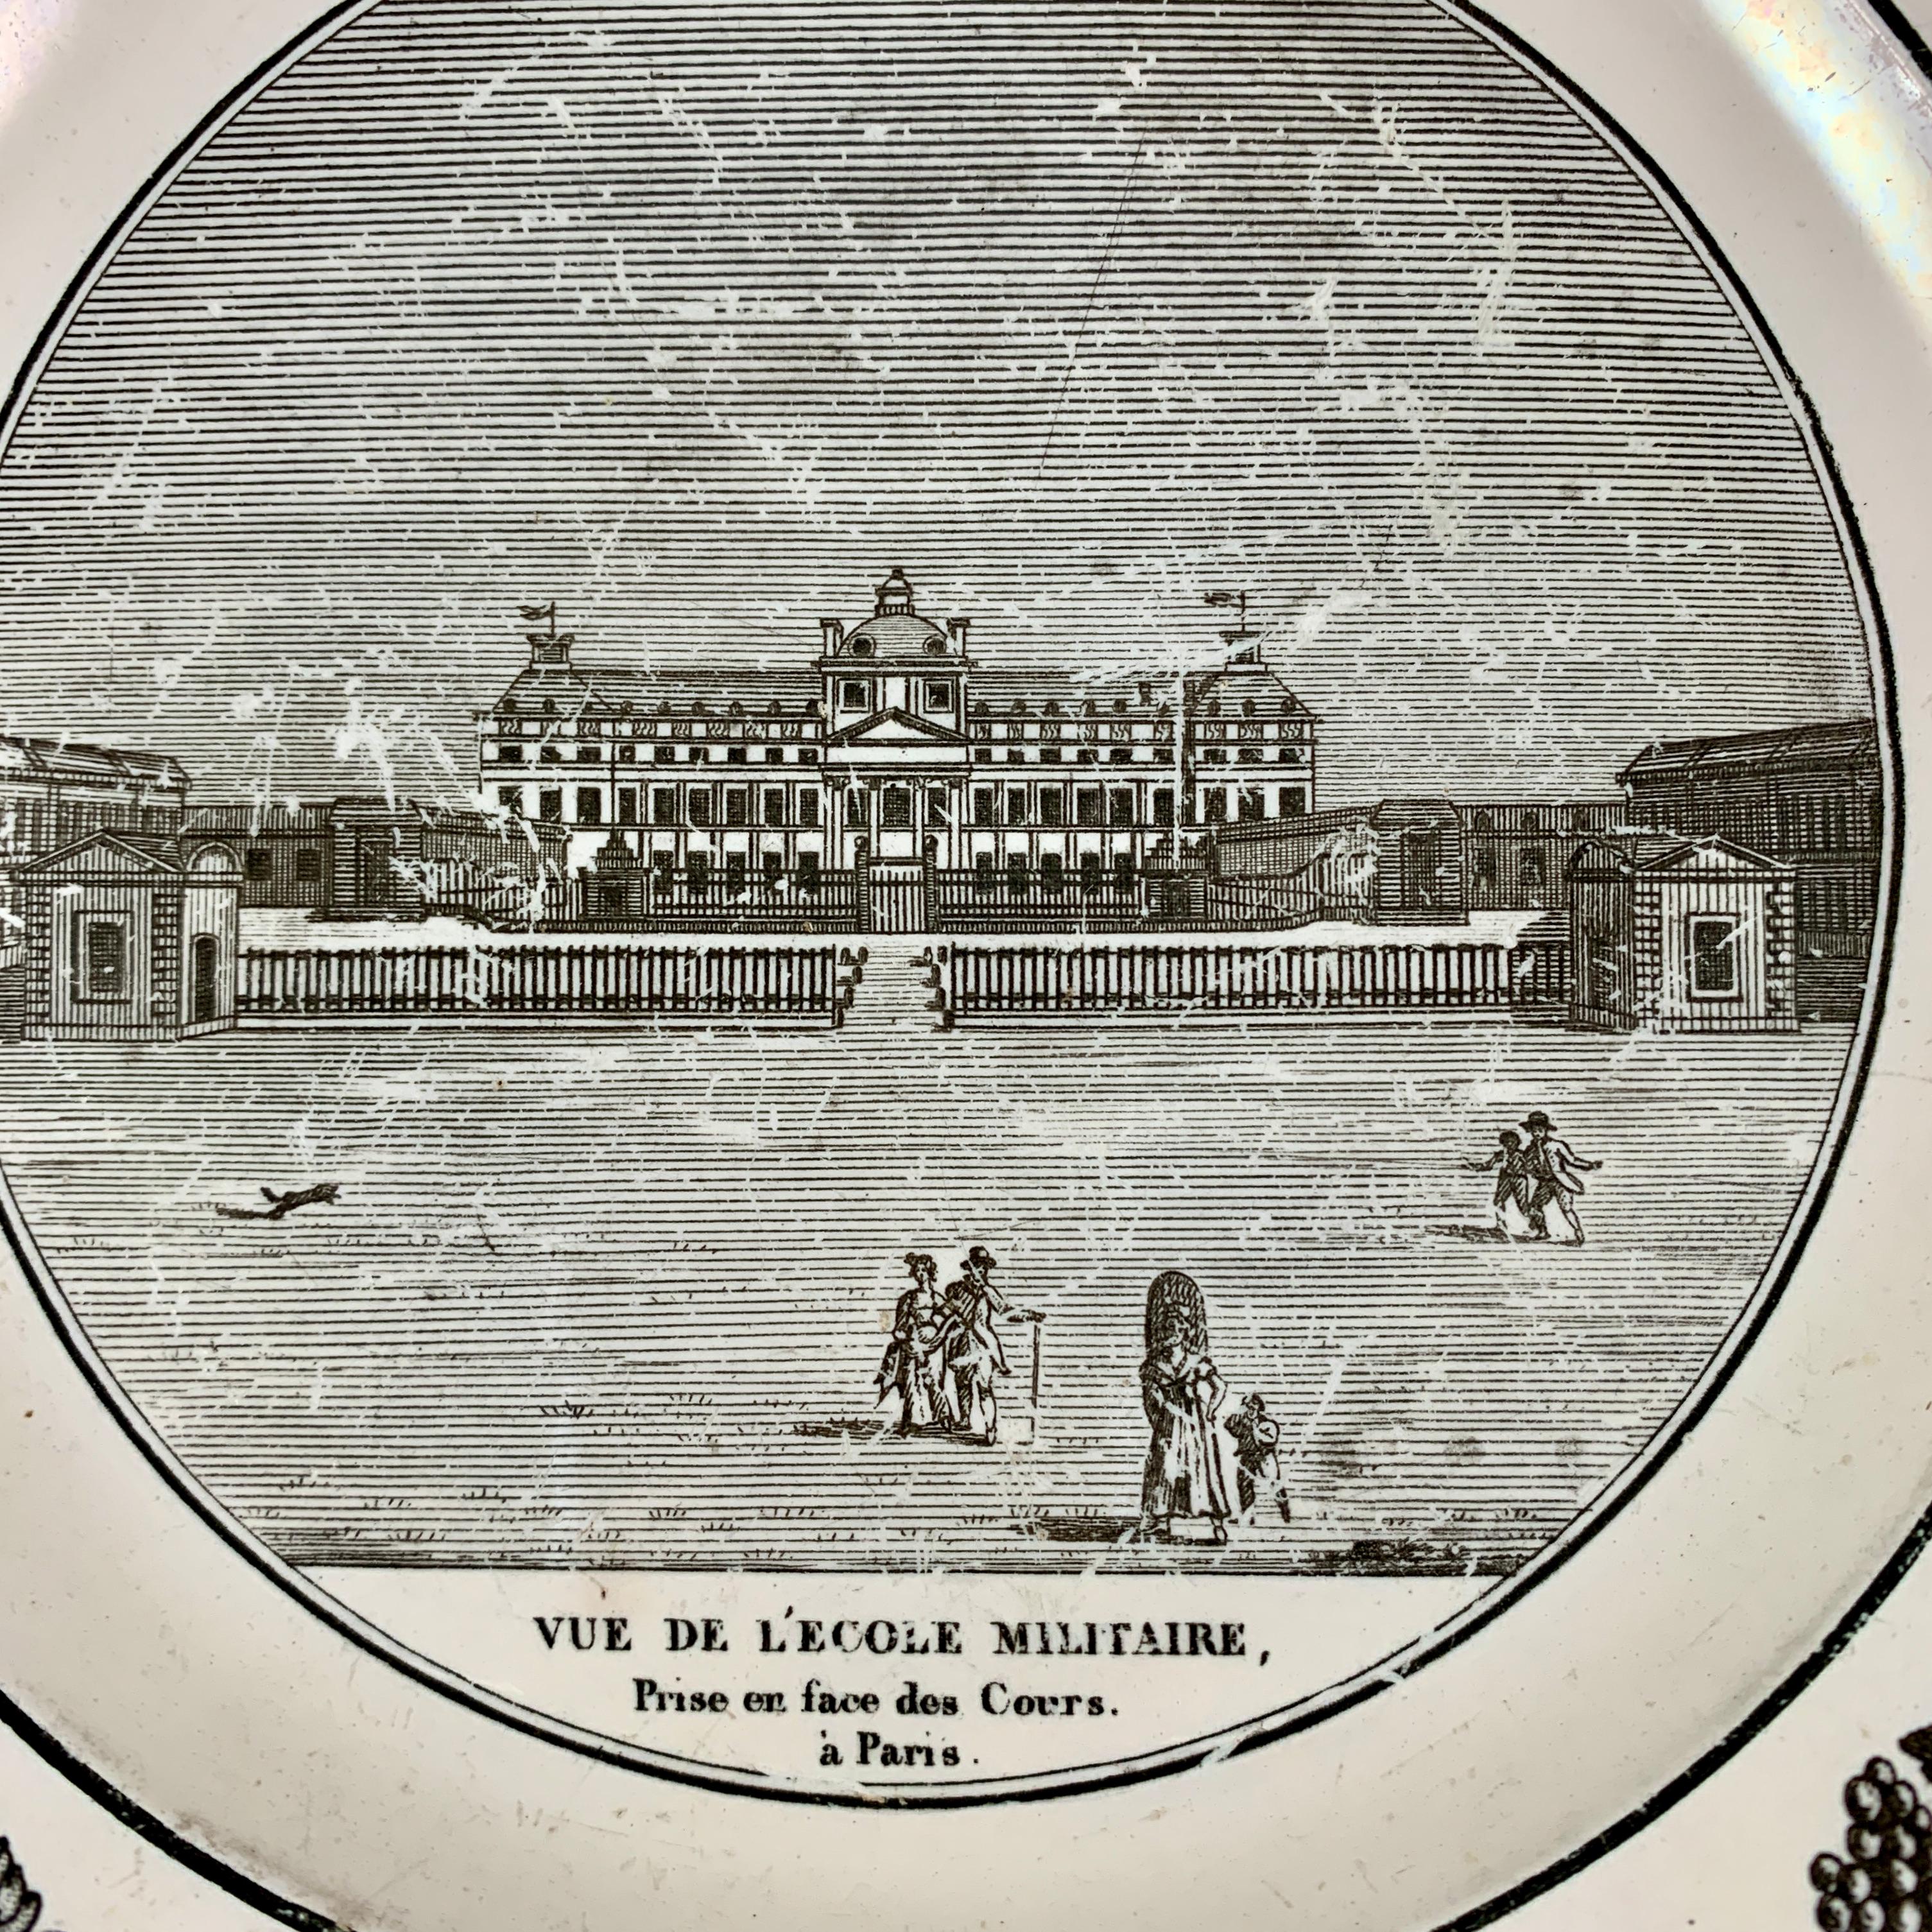 A French Neoclassical faïence transfer printed creamware plate from Stone, Coquerel et Le Gros, circa 1820-1830.

A black transfer of an architectural image on a creamware body, depicting the Vue De L’ École Militaire à Paris. The building is